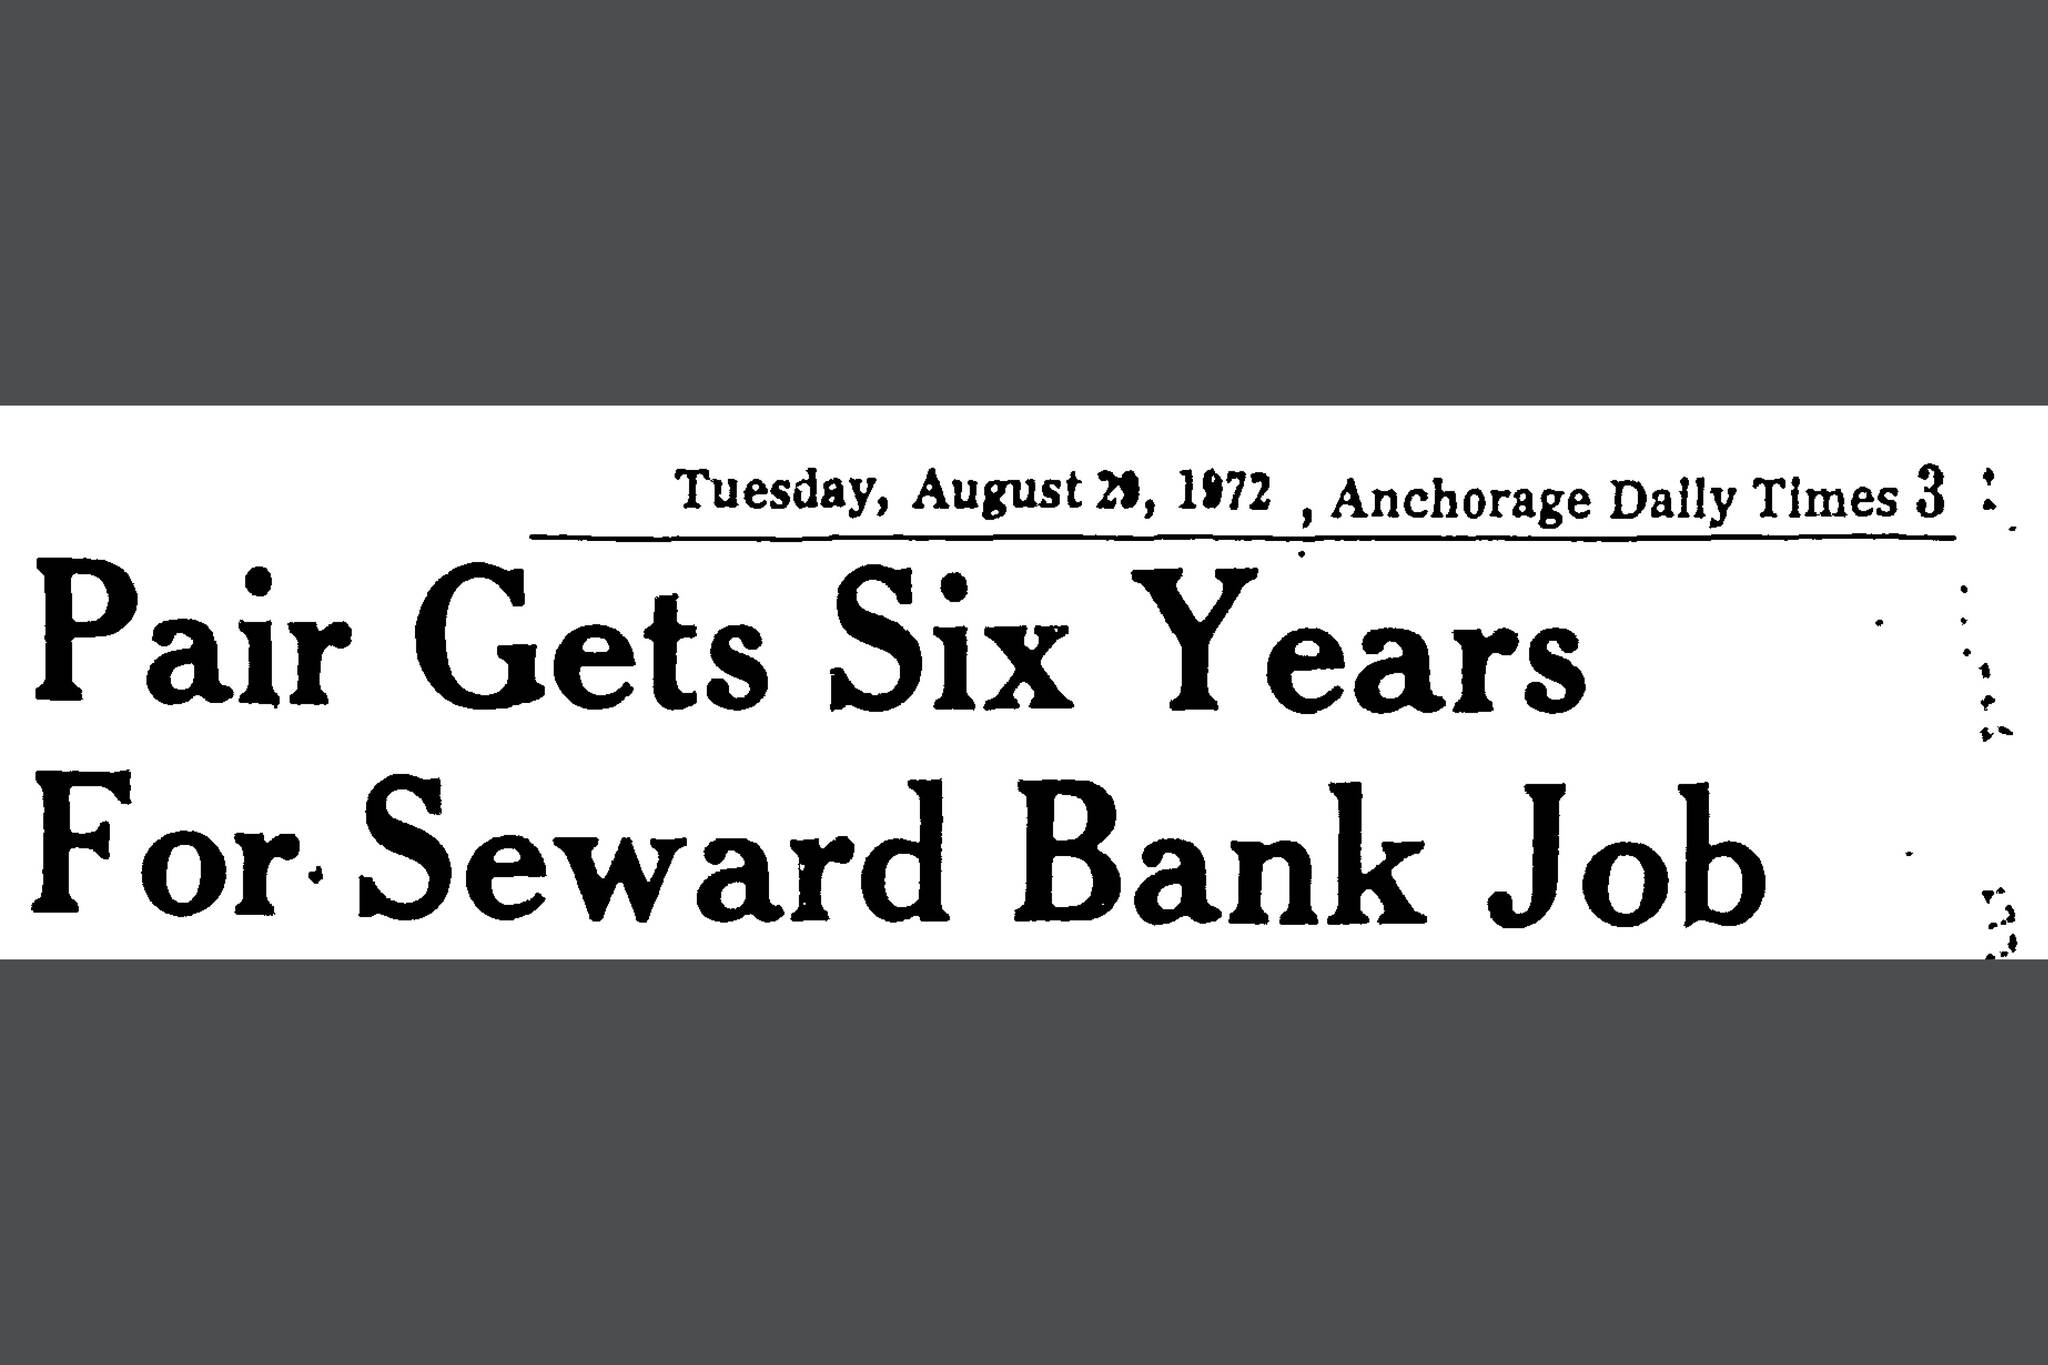 A year after the 1971 bank robbery, two of the suspects pleaded guilty and were sentenced to six years in prison, as seen in this Anchorage Daily Times headline from August 1972. The third suspect pleaded guilty a few days later.